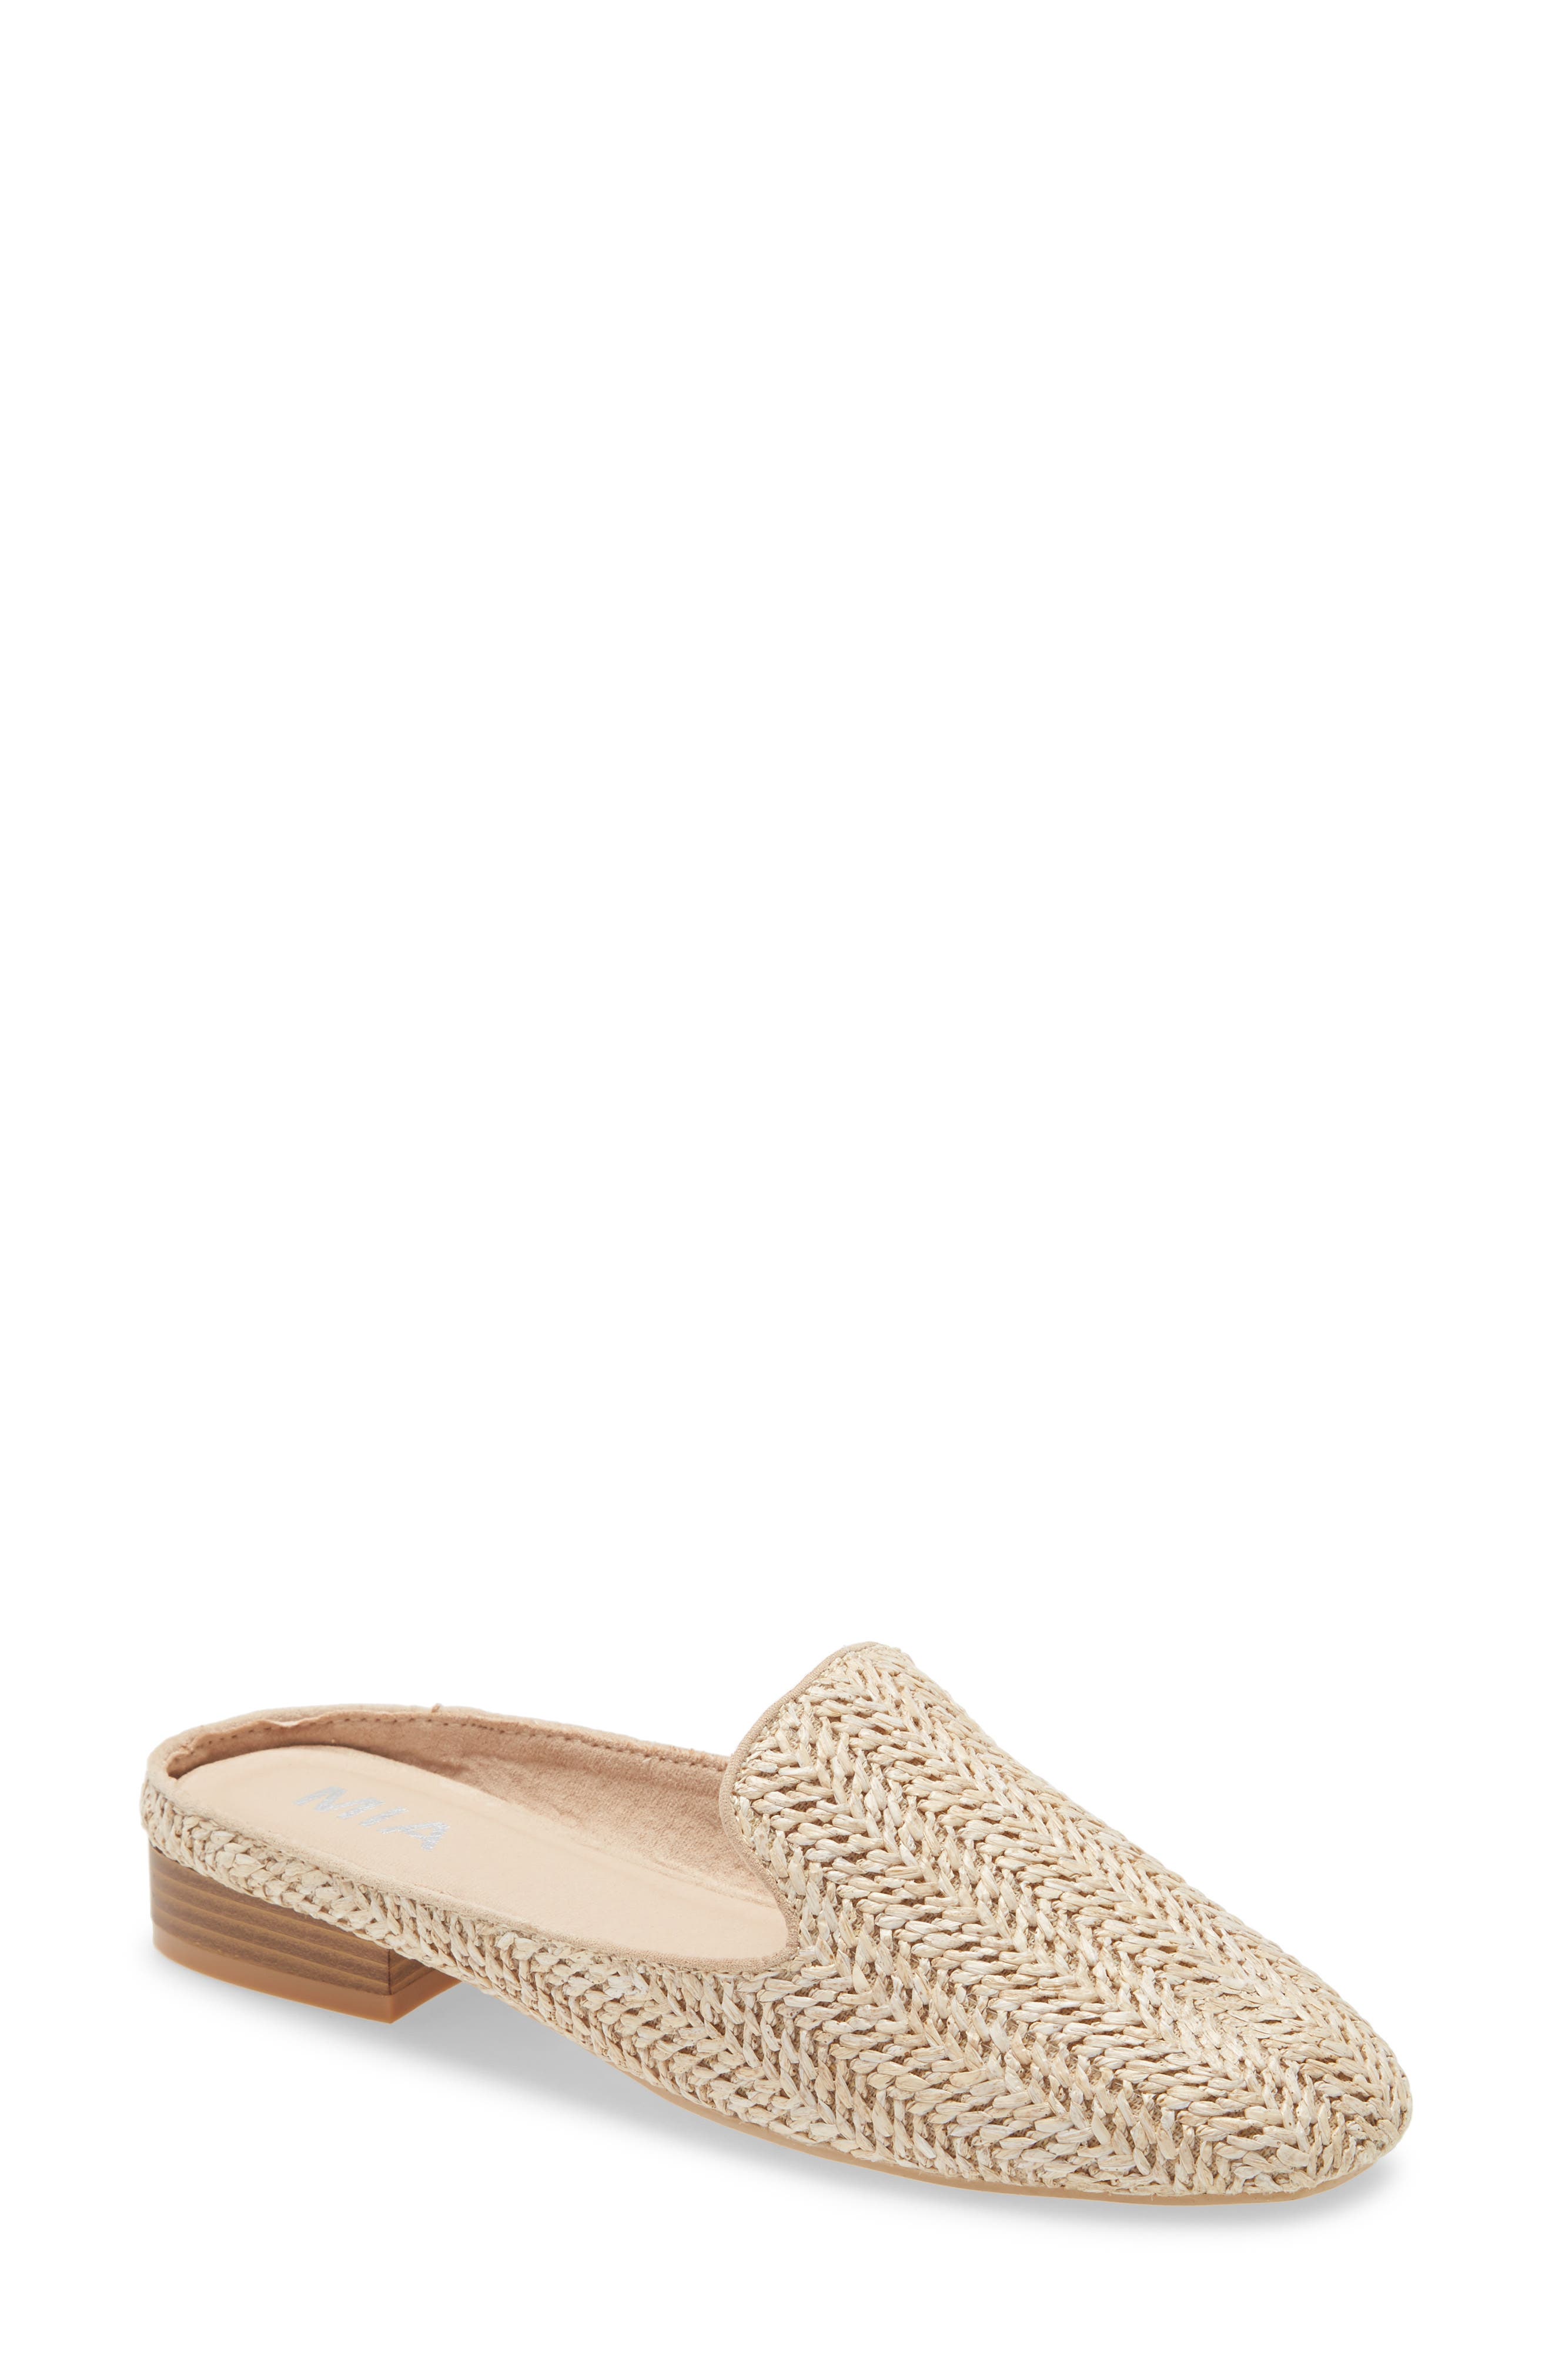 nordstrom women's shoes clearance